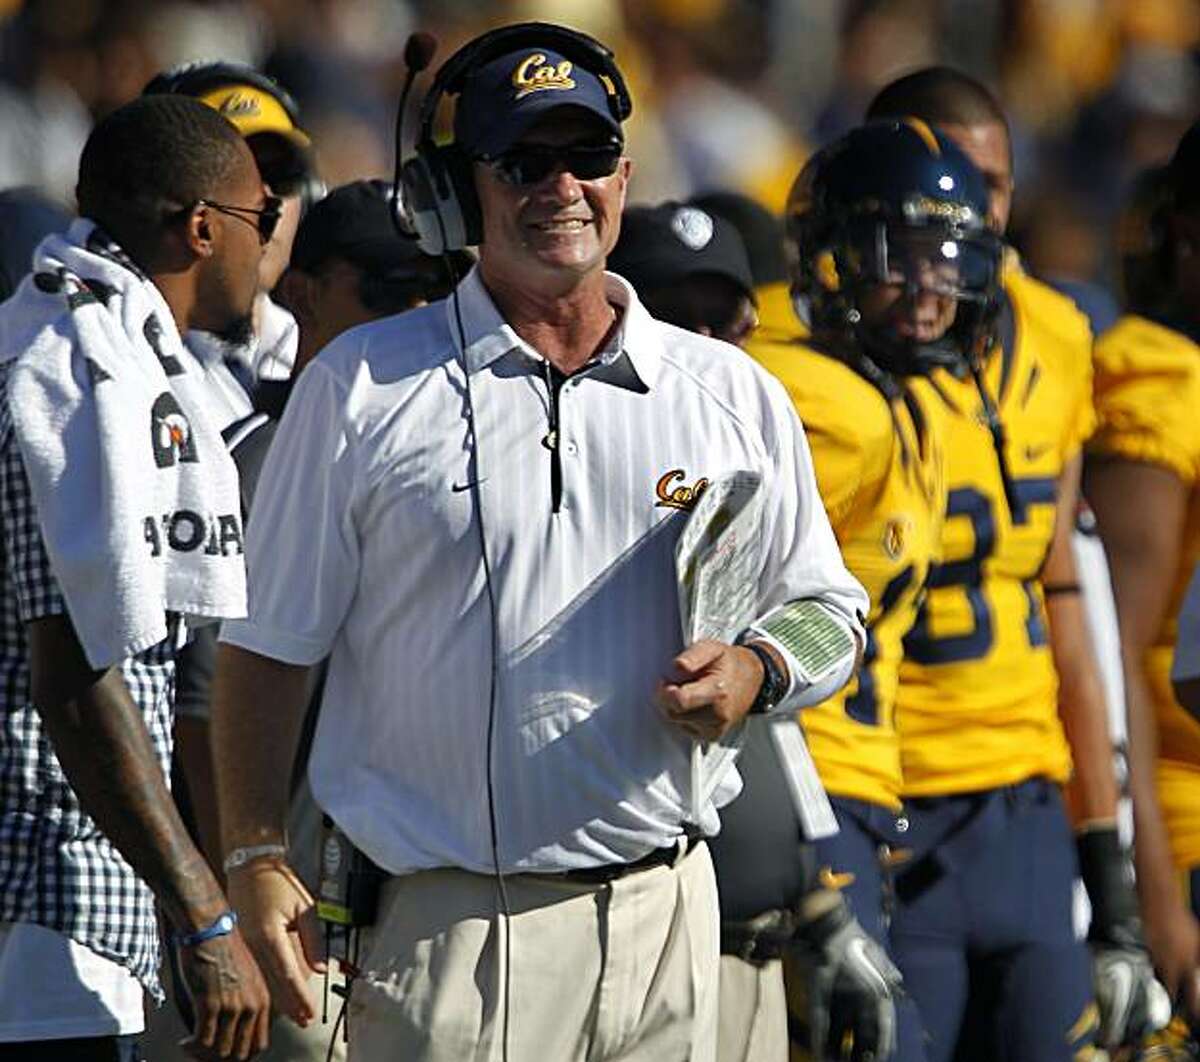 Cal head coach Jeff Tedford found plenty of reasons to smile in the Bears' game against the UCLA Bruins at Memorial Stadium in Berkeley on Saturday.